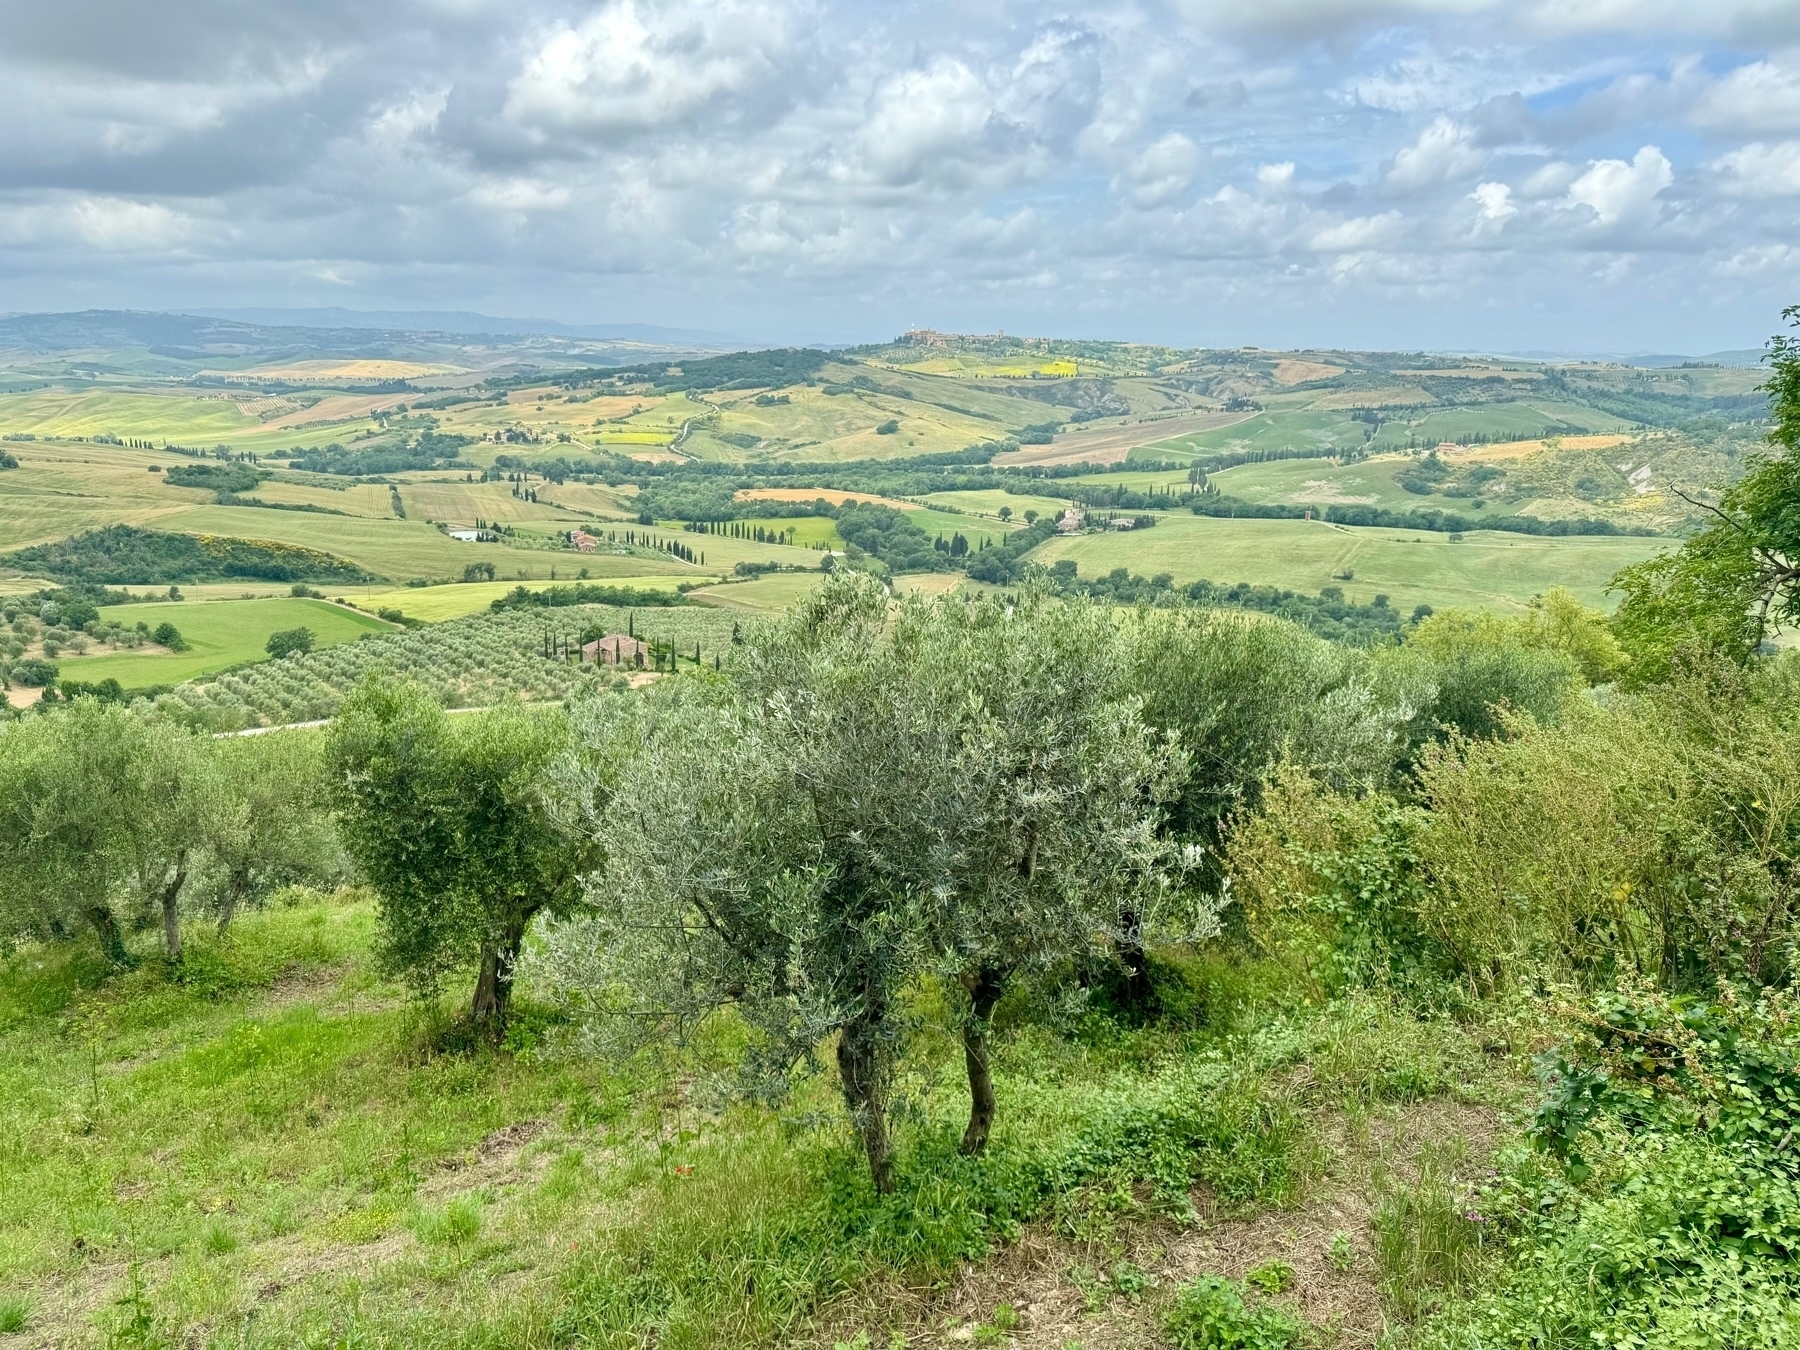 A scenic landscape featuring rolling hills with various shades of green and yellow fields, dotted with trees and shrubbery. The foreground shows olive trees and other vegetation, while the background includes an expansive view of farmland and distant hills under a partly cloudy sky.